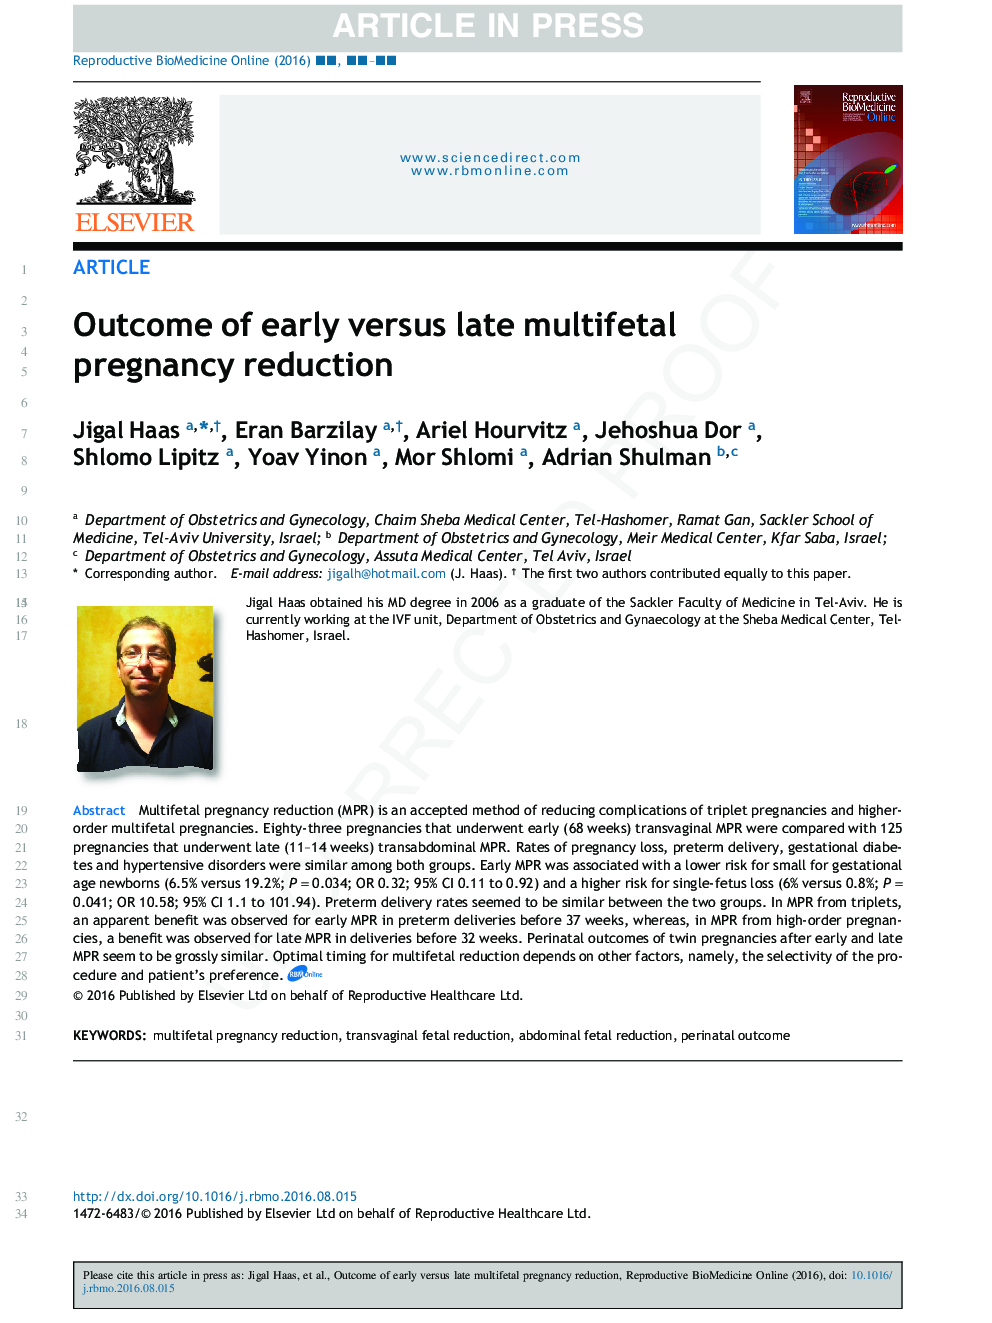 Outcome of early versus late multifetal pregnancy reduction